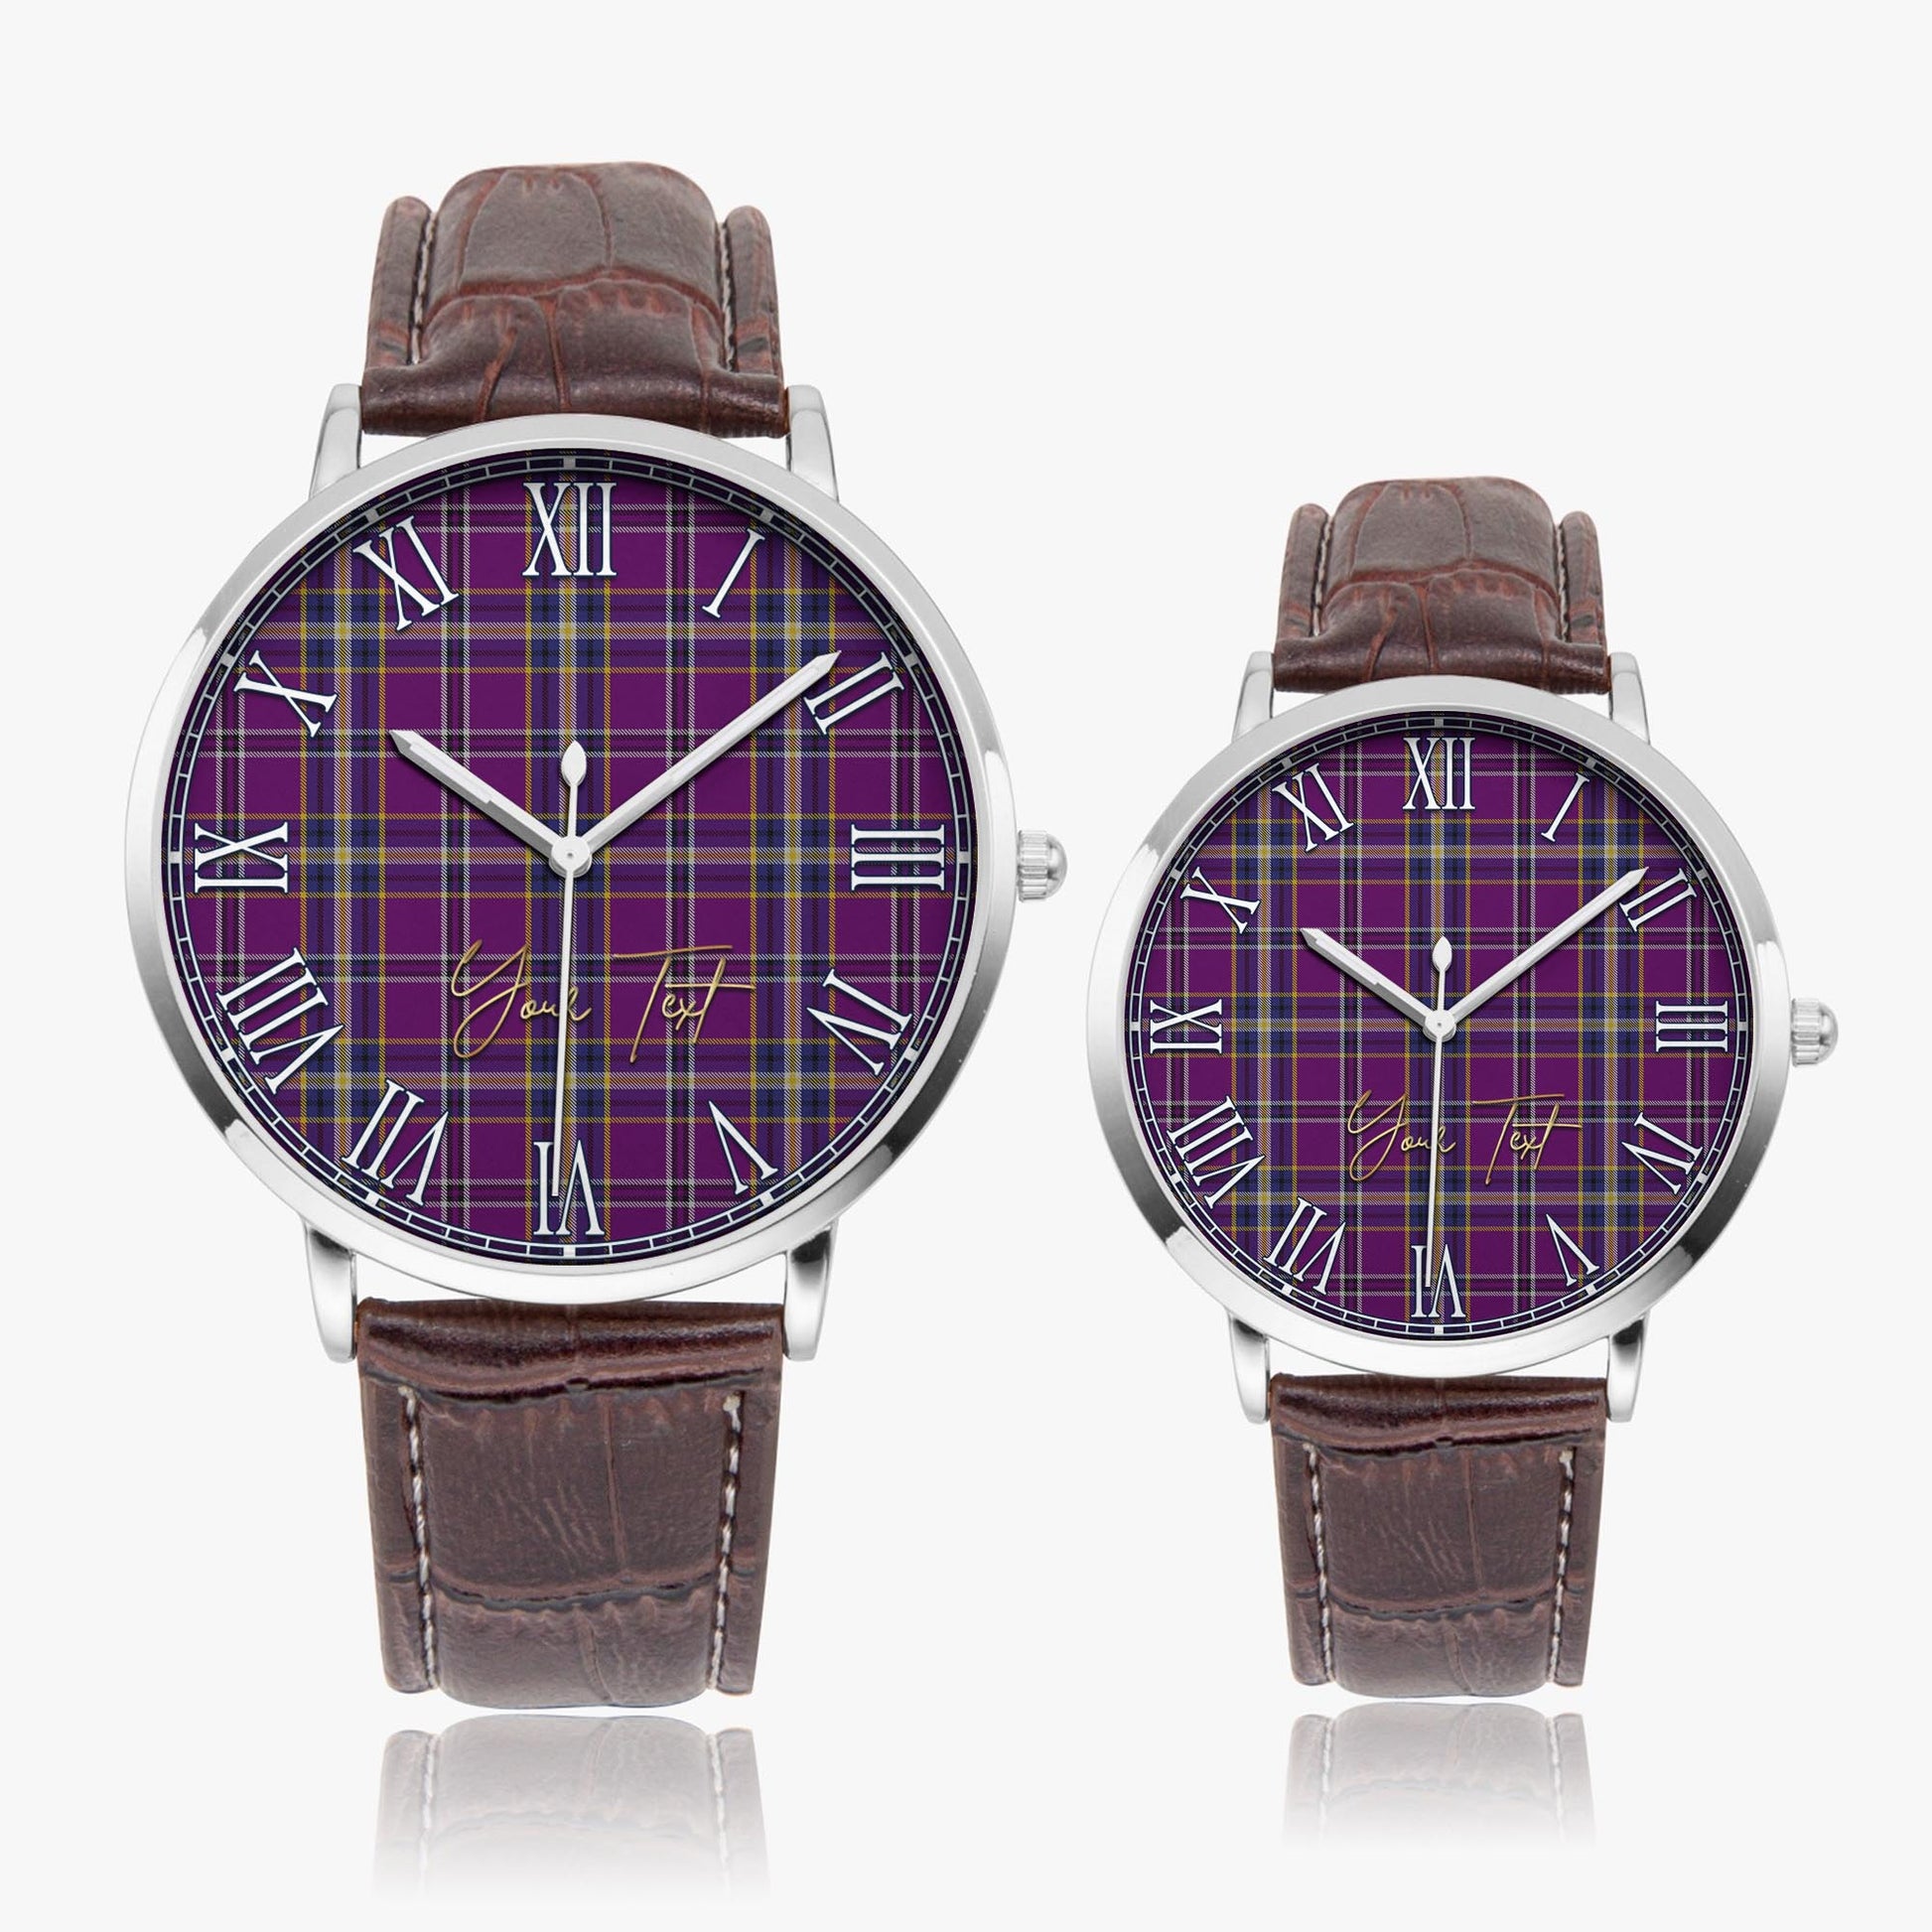 O'Riagain Tartan Personalized Your Text Leather Trap Quartz Watch Ultra Thin Silver Case With Brown Leather Strap - Tartanvibesclothing